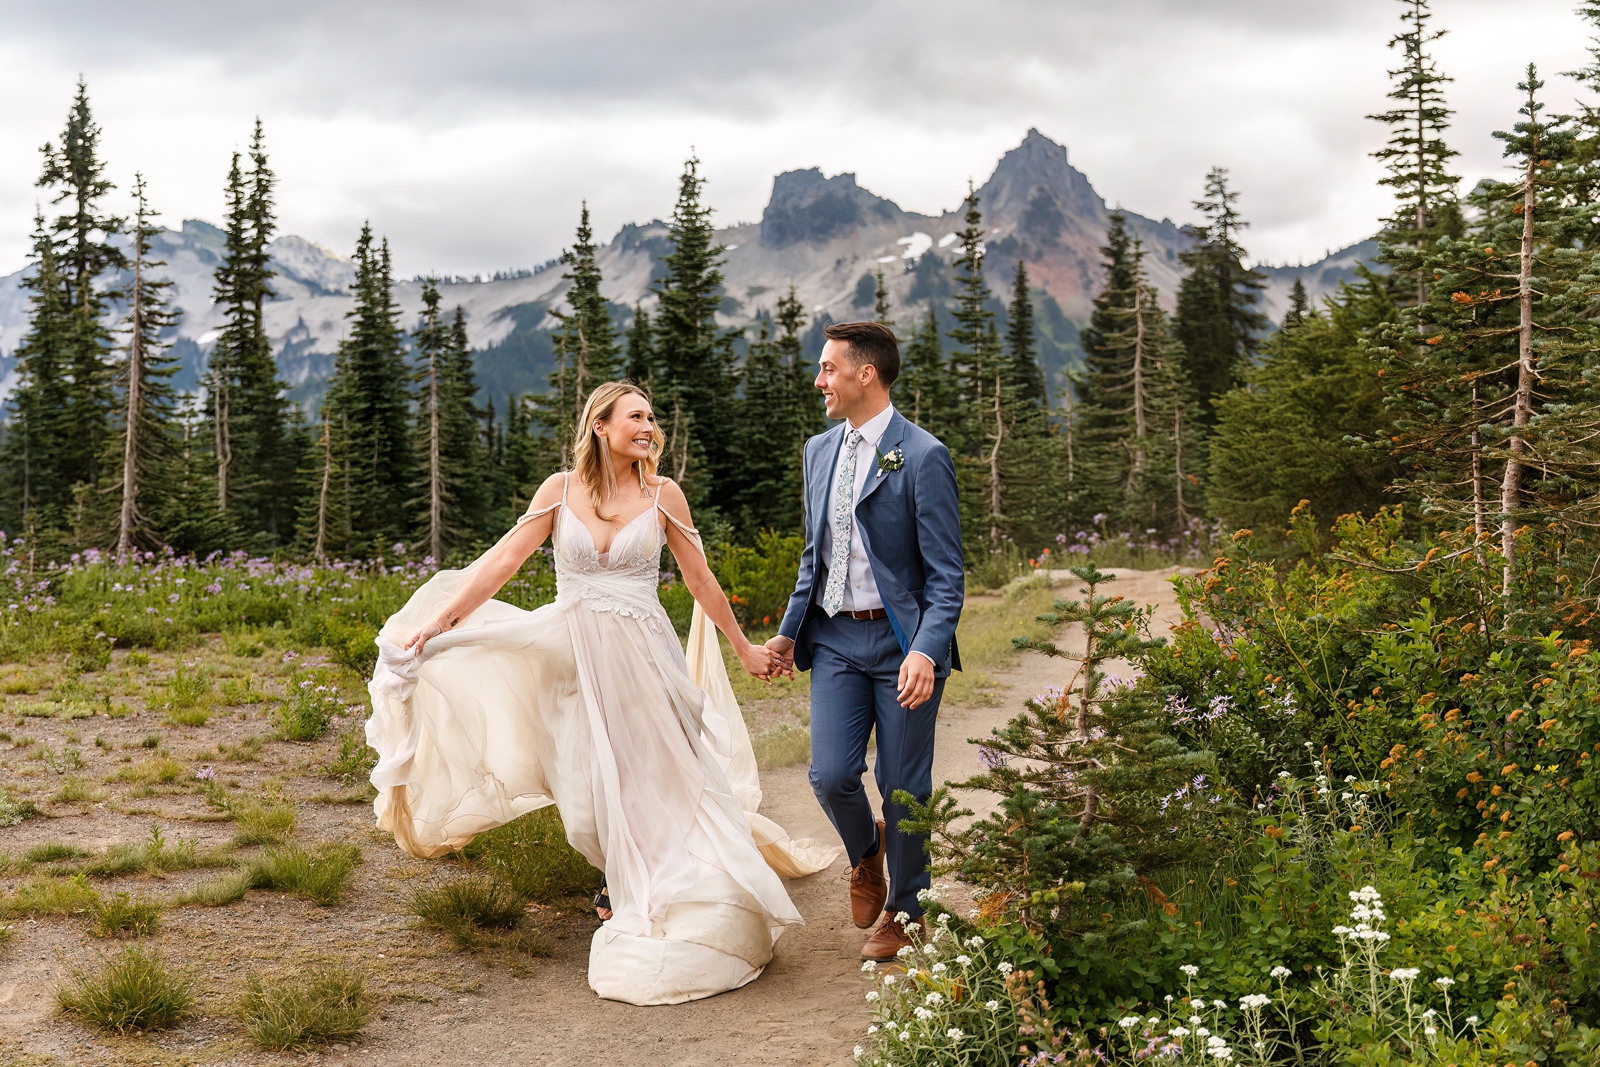 This eloping couple runs down a trail in front of mountains in Mount Rainier NP.